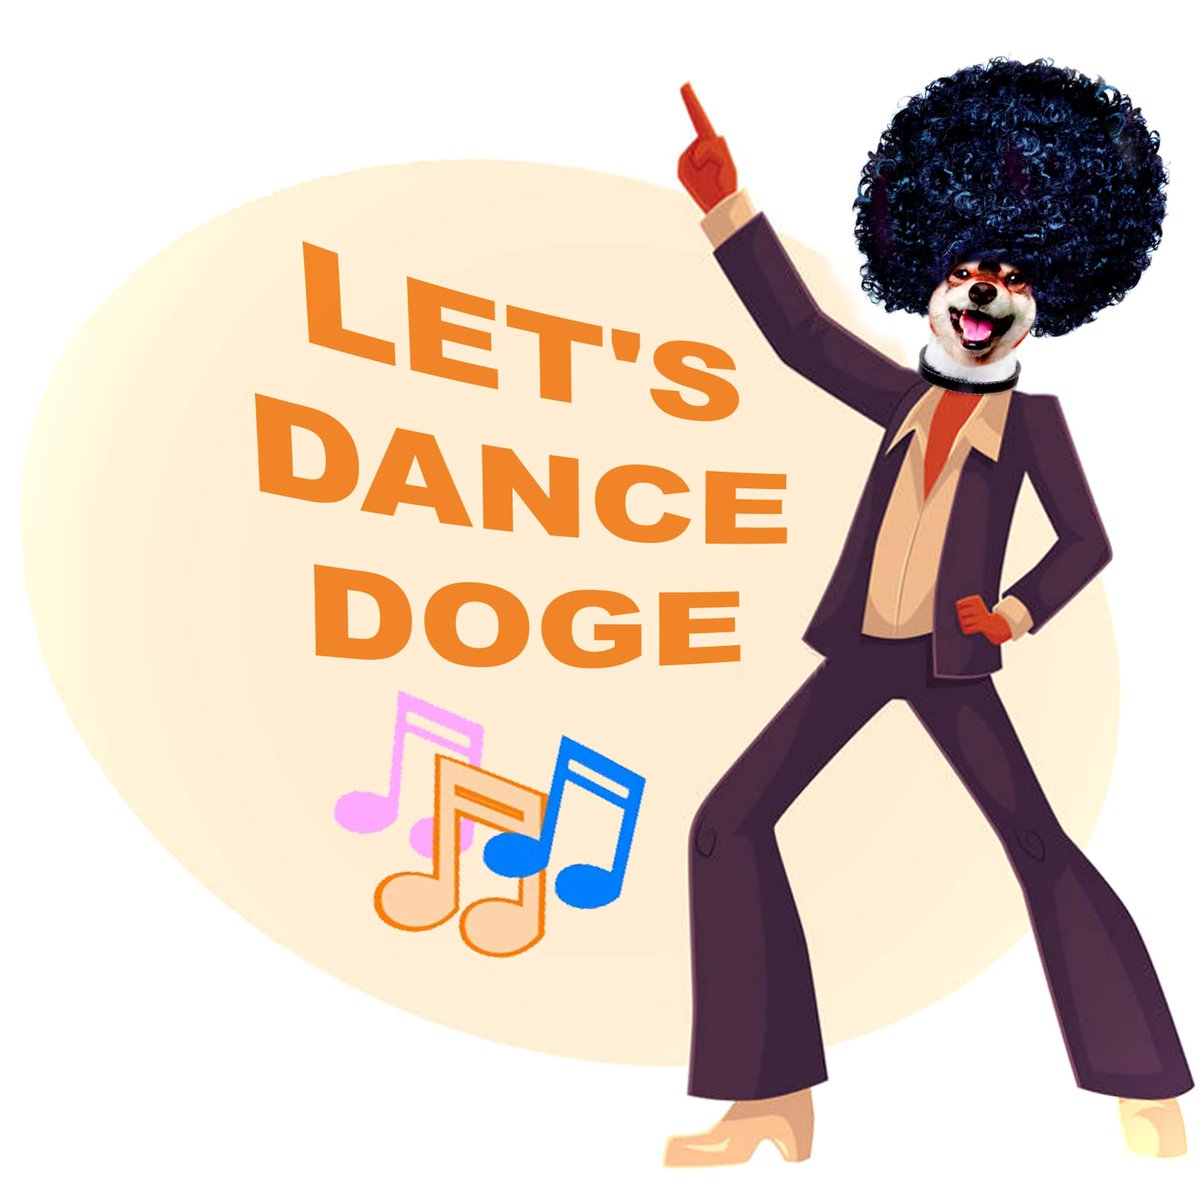 Happy Saturday And Enjoy Your Weekend #DogeFamily #TwitterFriends You’re so groovy 🤗😁🤗🕺💃🌼🌼🌼💚💚💚🙏🙏🙏🤩😘🤩💙💙💙 Disco Disco Good Good